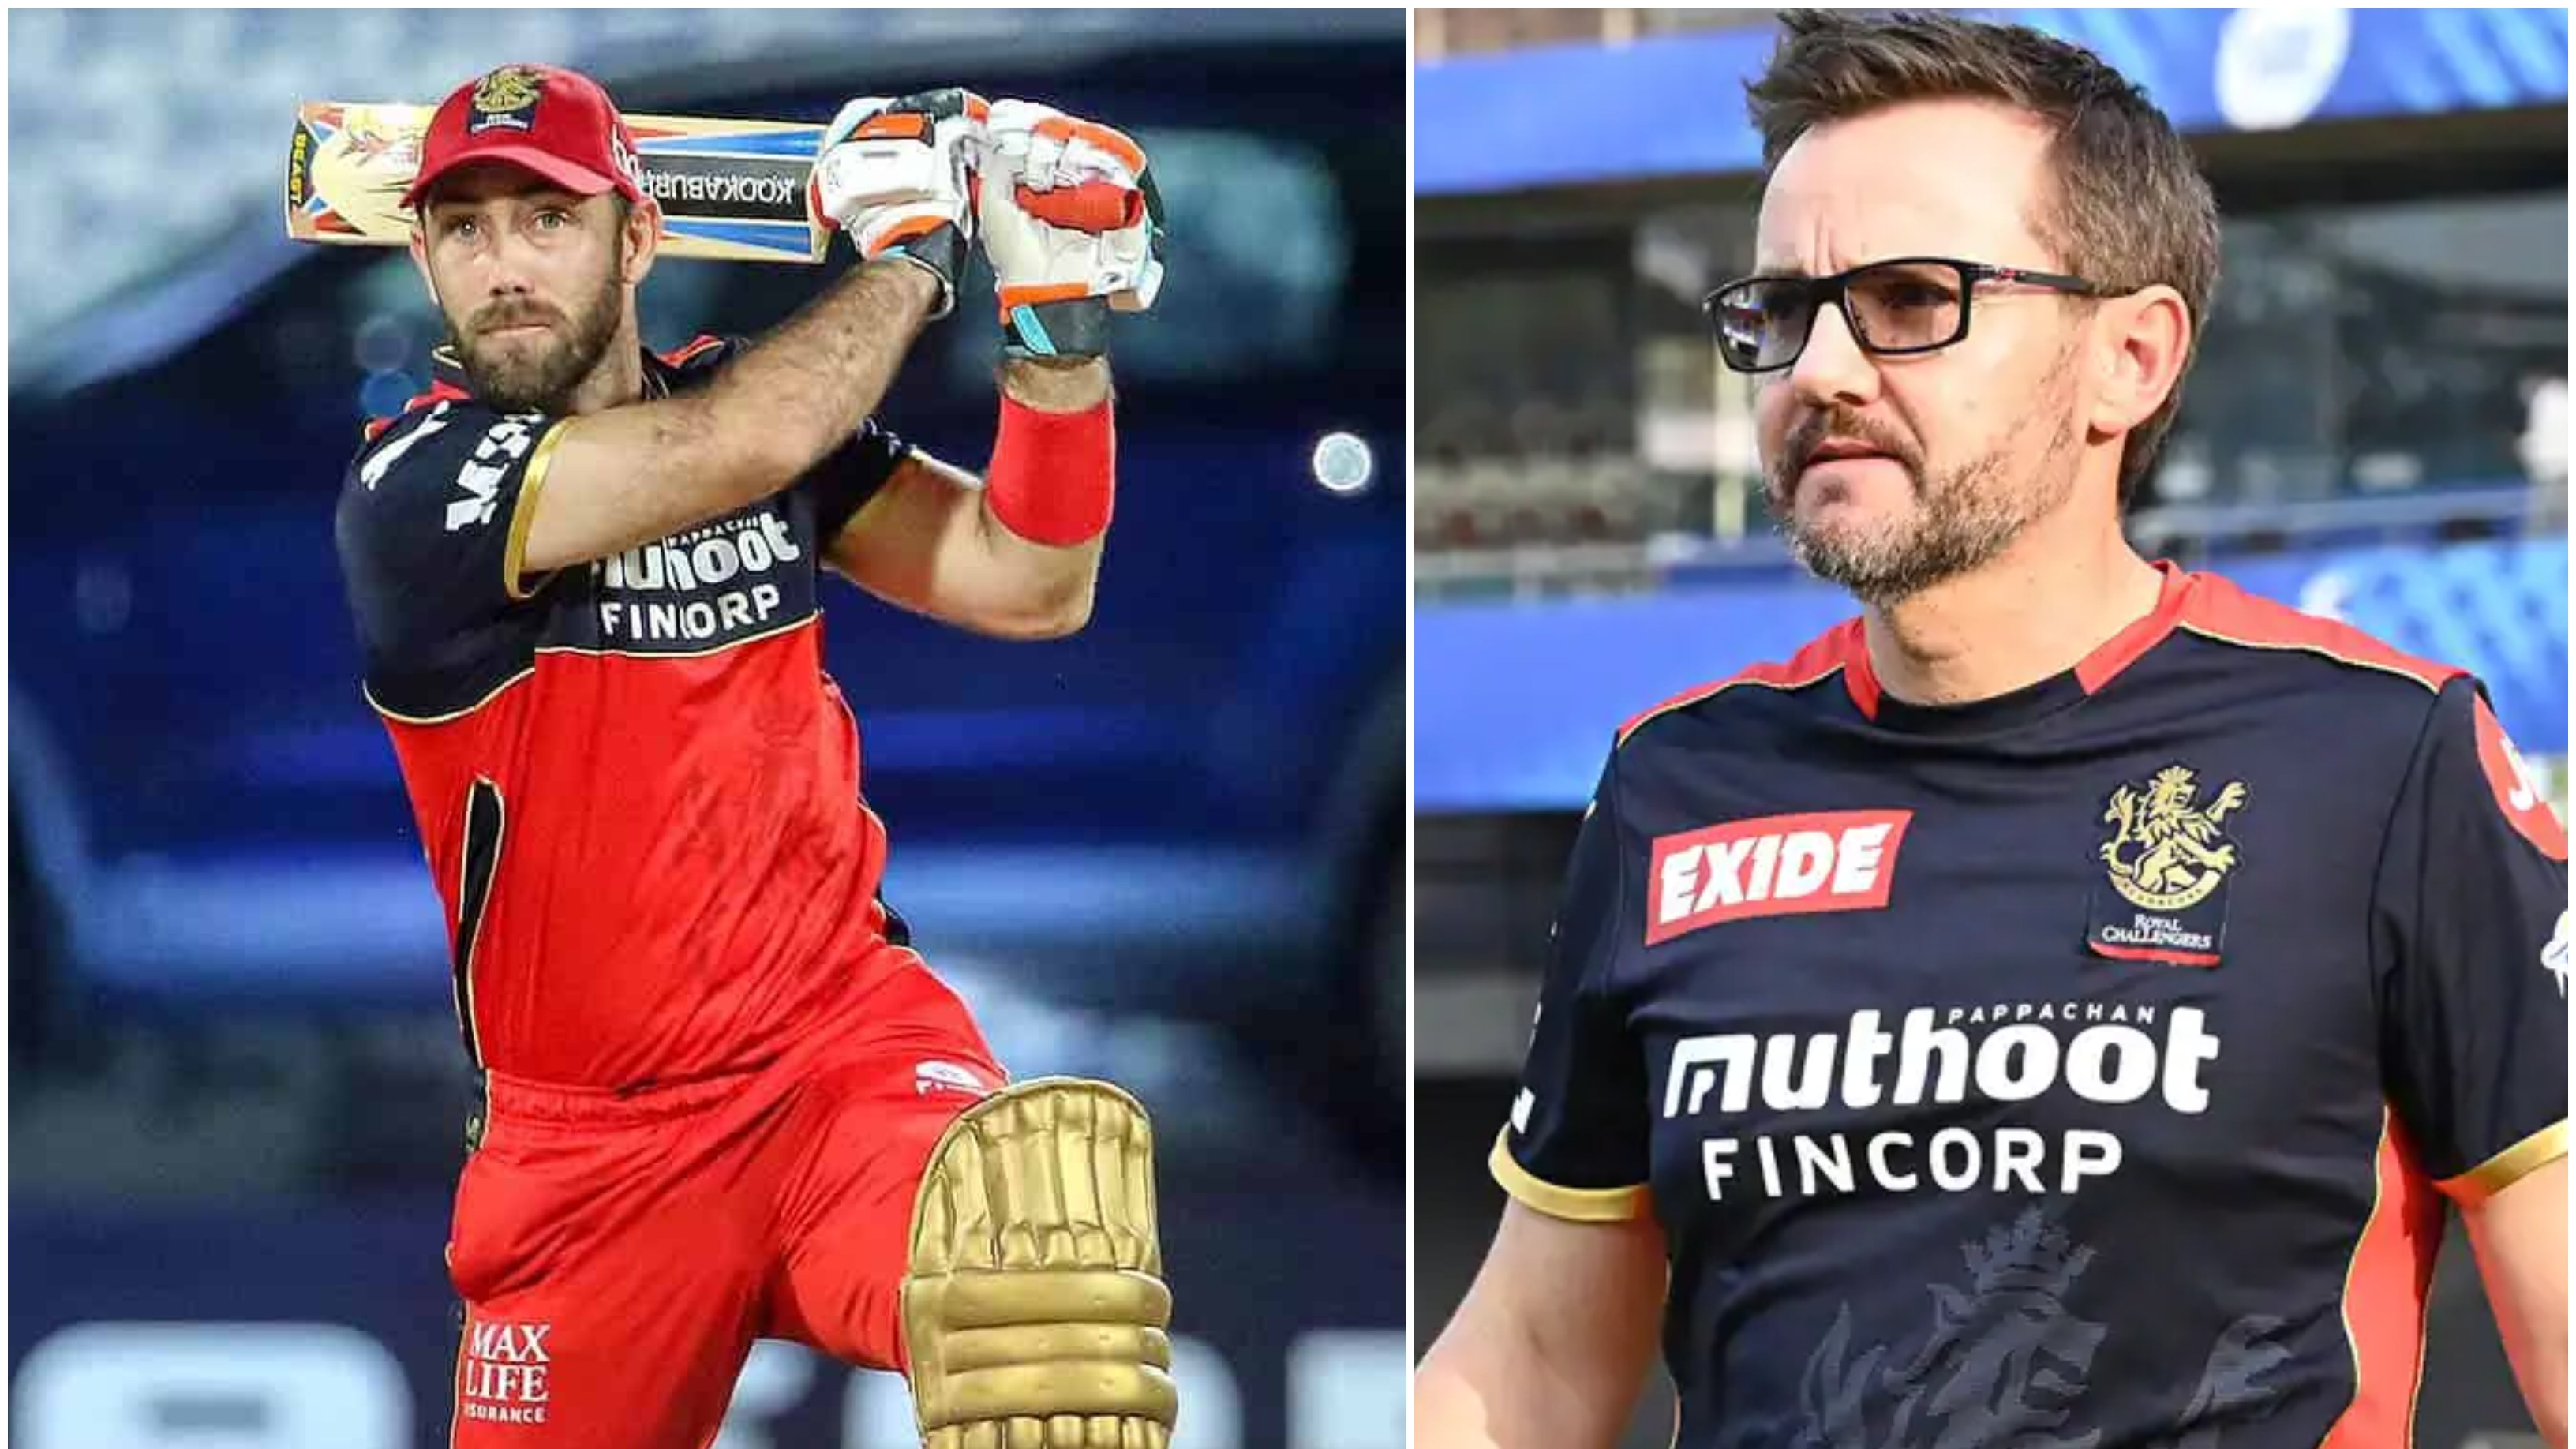 IPL 2022: Glenn Maxwell to be available for RCB from 9th April, confirms Mike Hesson